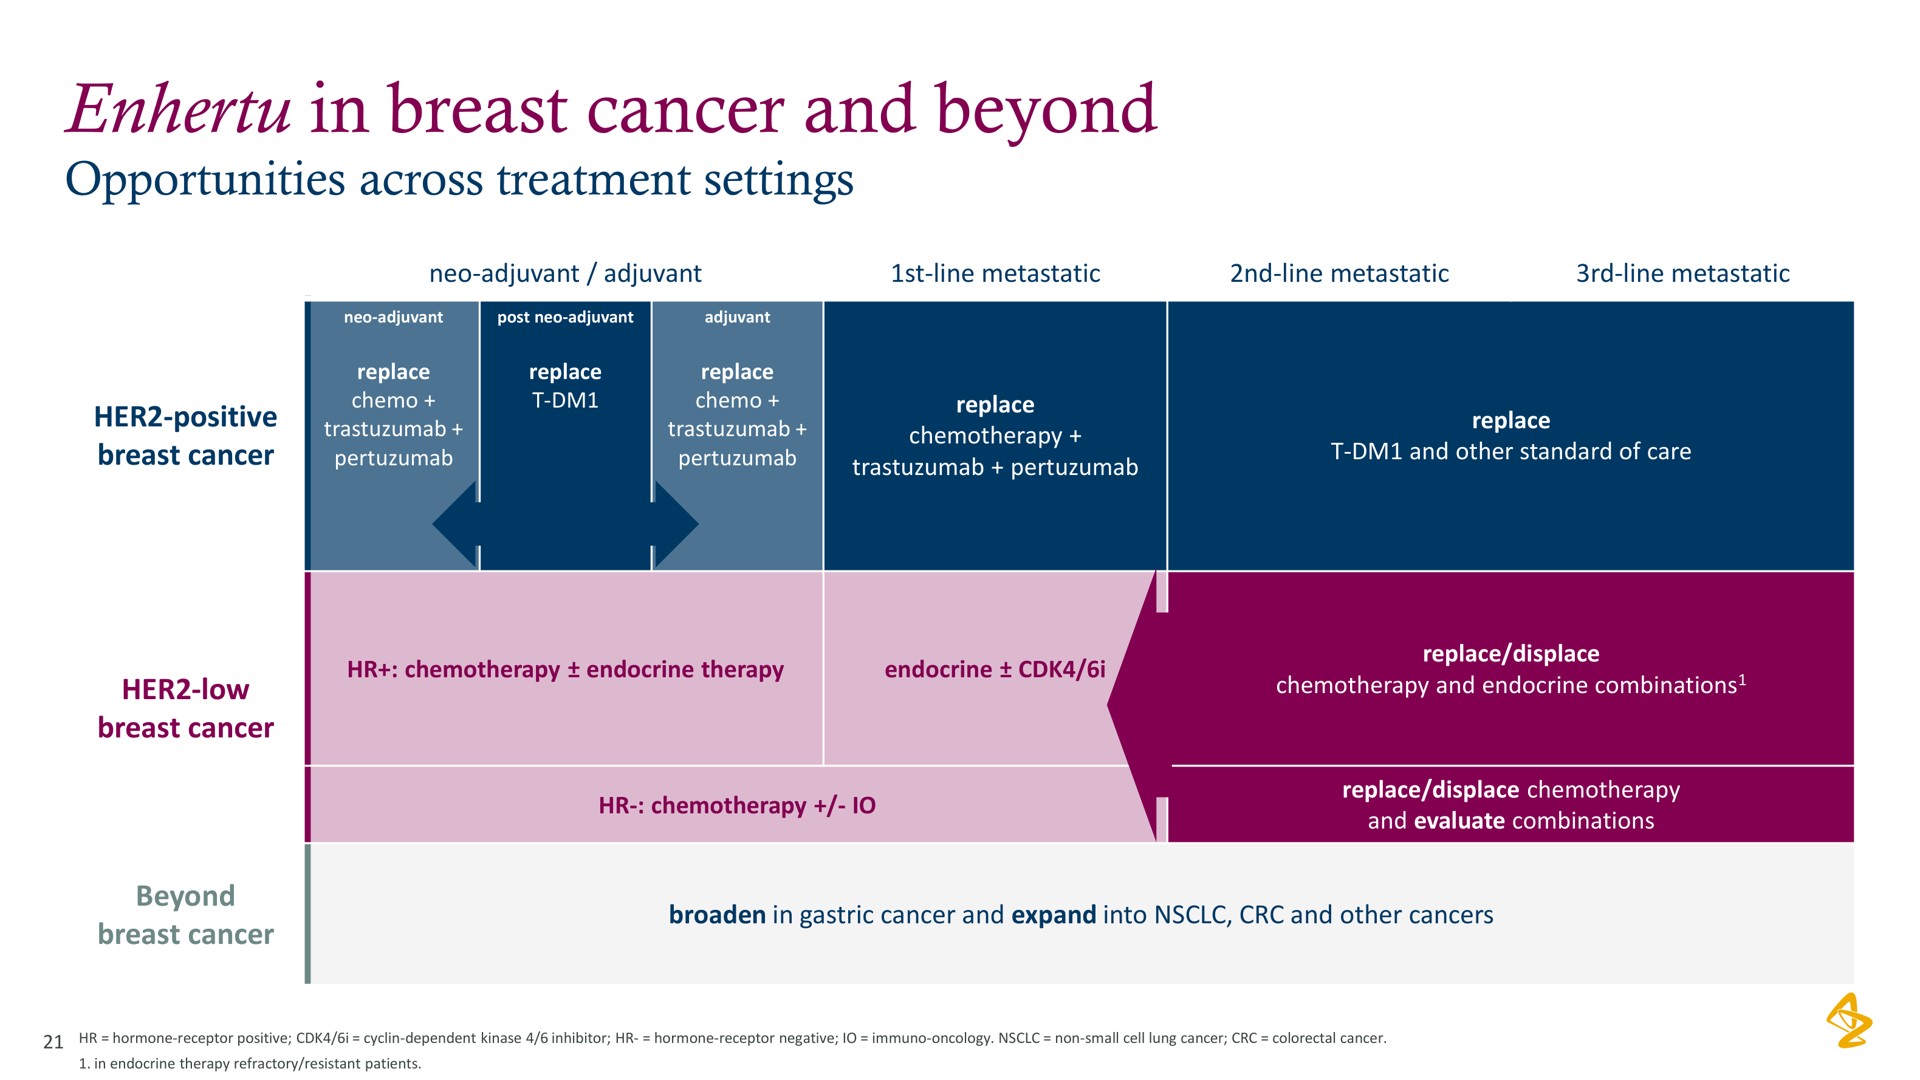 in breast cancer and beyond | AstraZeneca